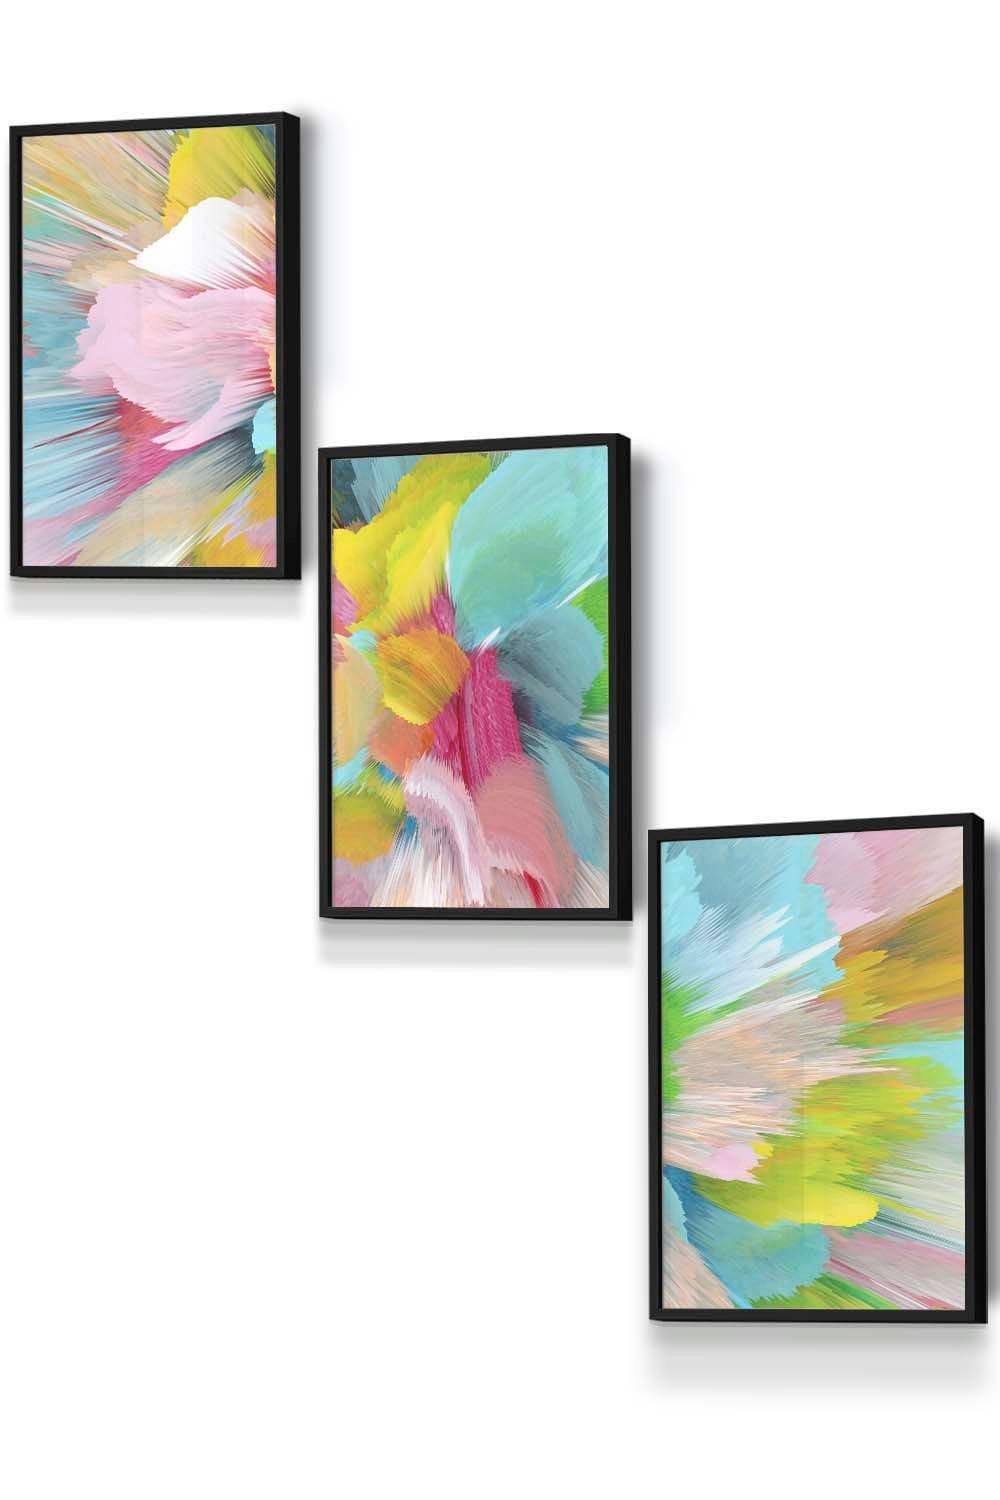 Set of 3 Black Framed Abstract Bright Painted Fractal Wall Art